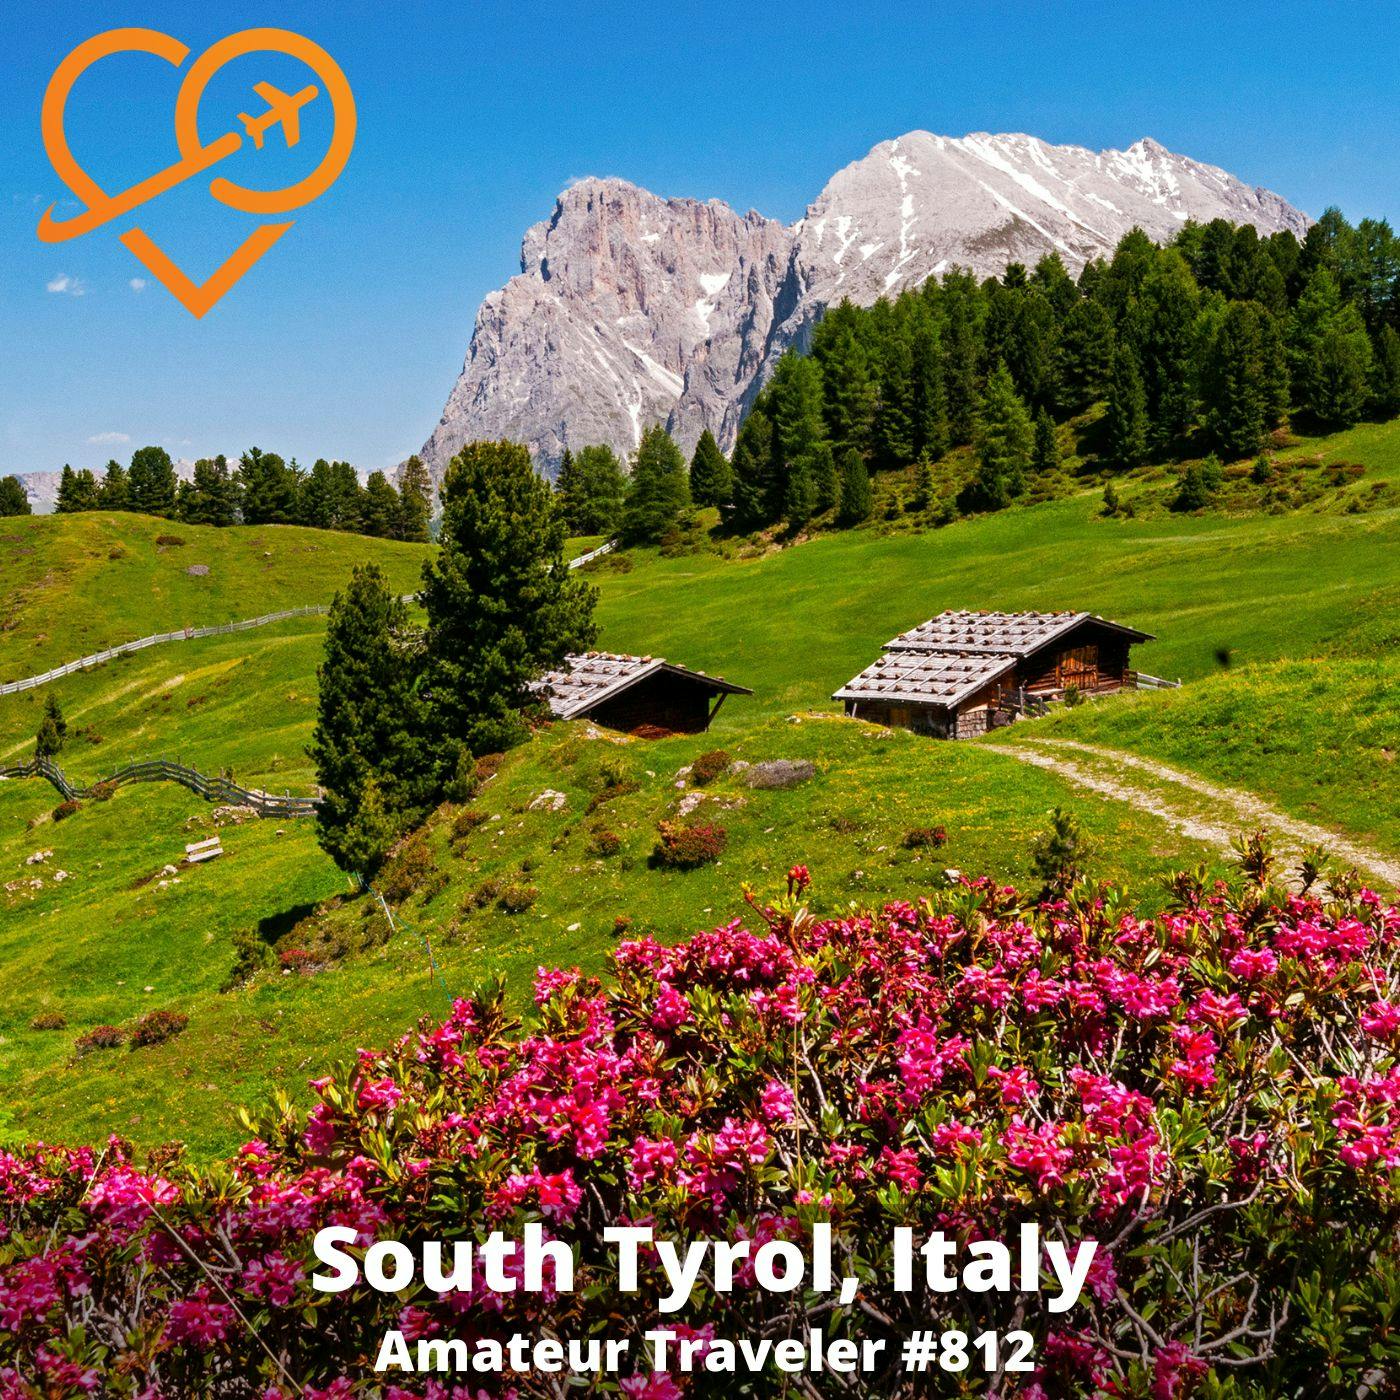 AT#812 - Travel to the South Tyrol, Italy